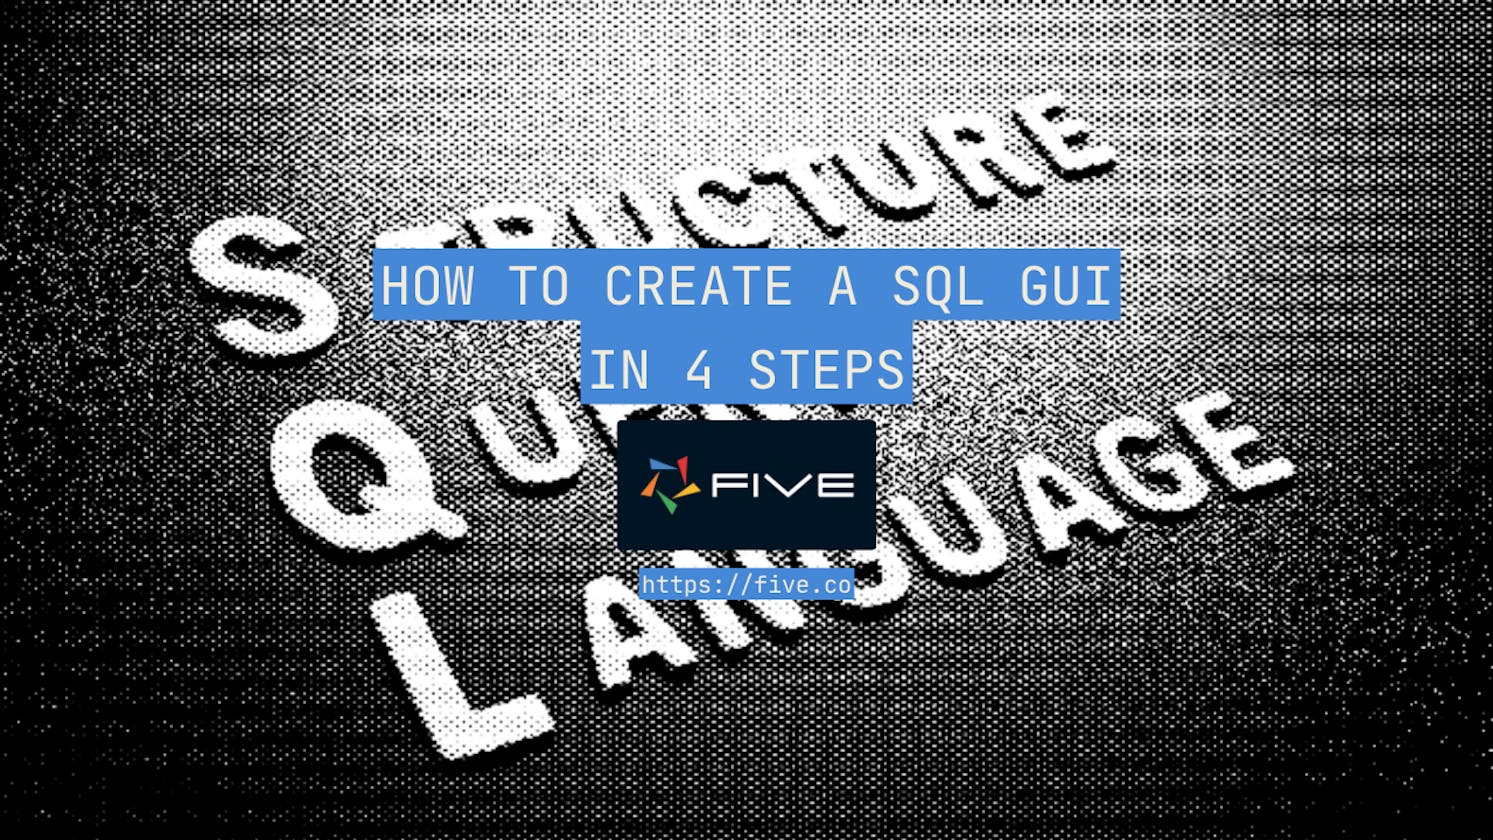 How to Create a SQL GUI in 4 Steps